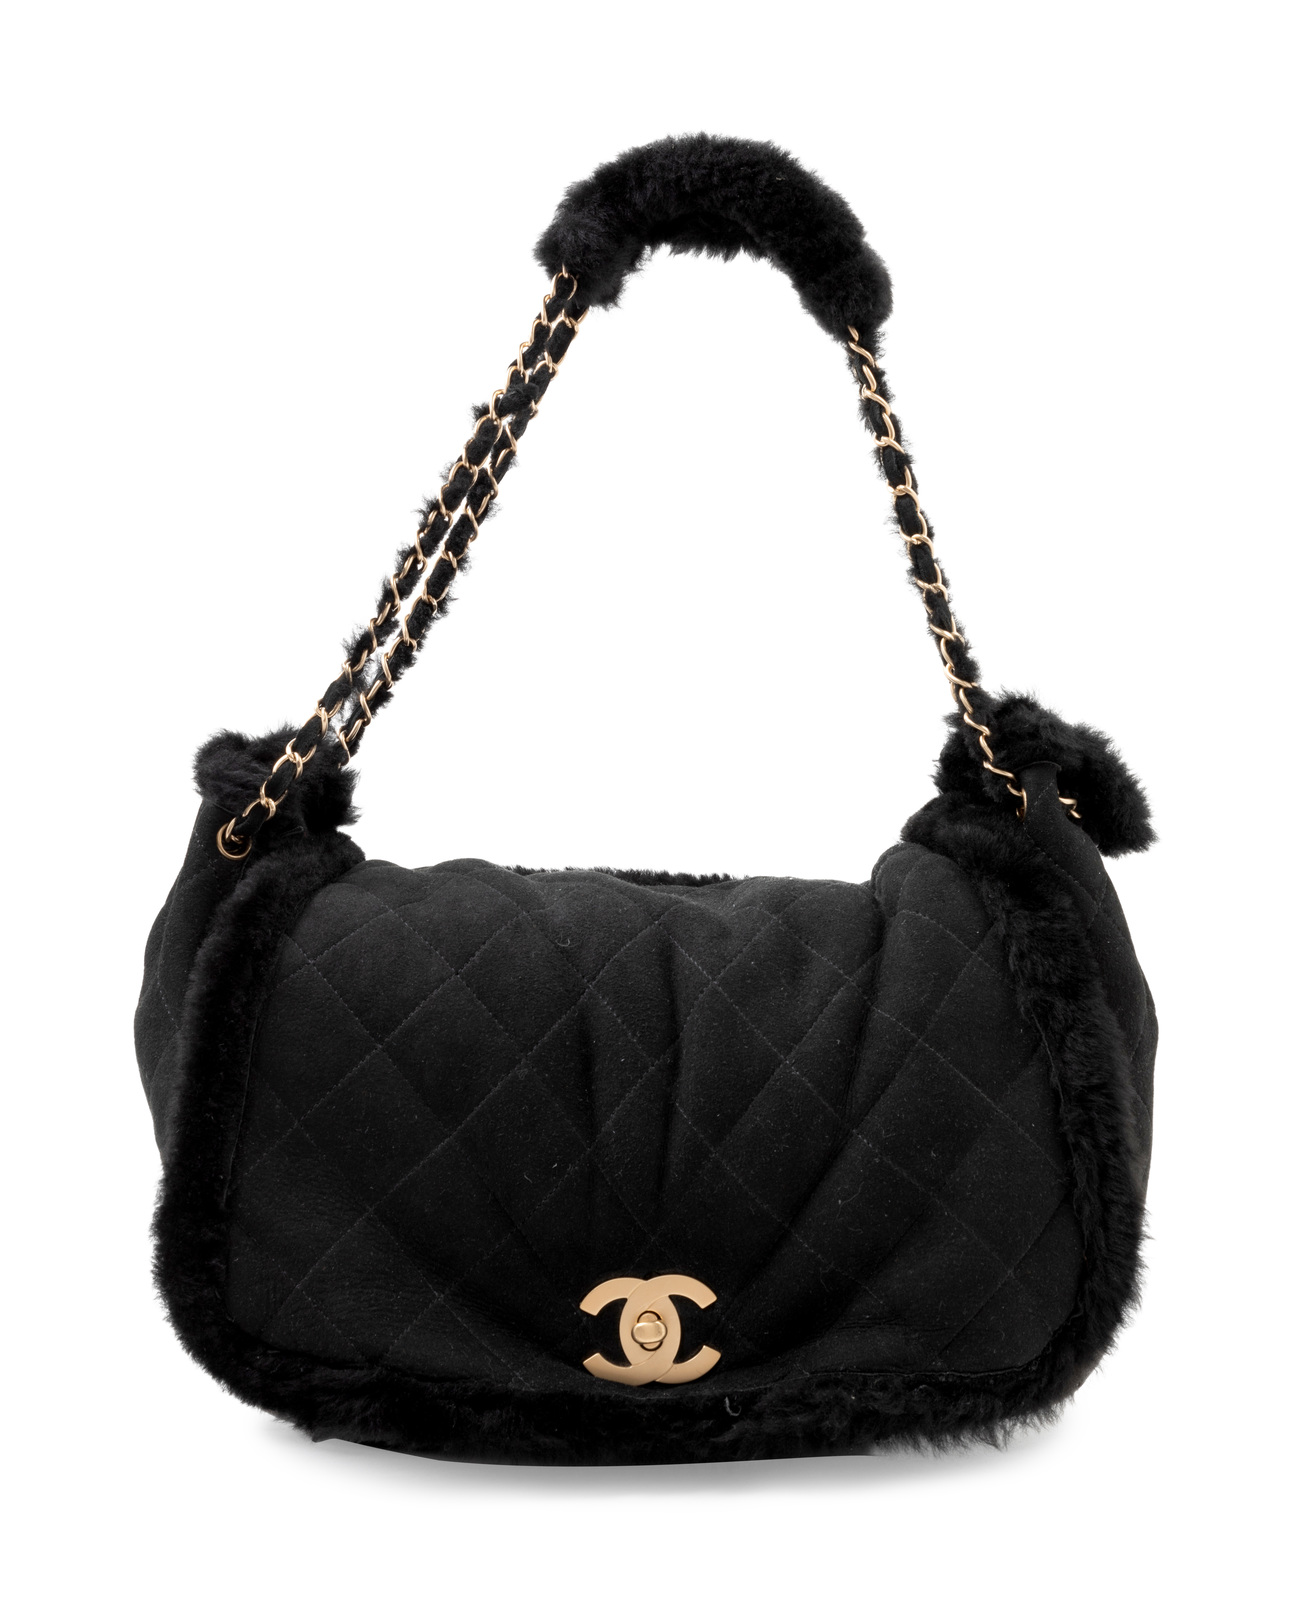 Chanel Black Suede and Fur Bag, 1990-2000s